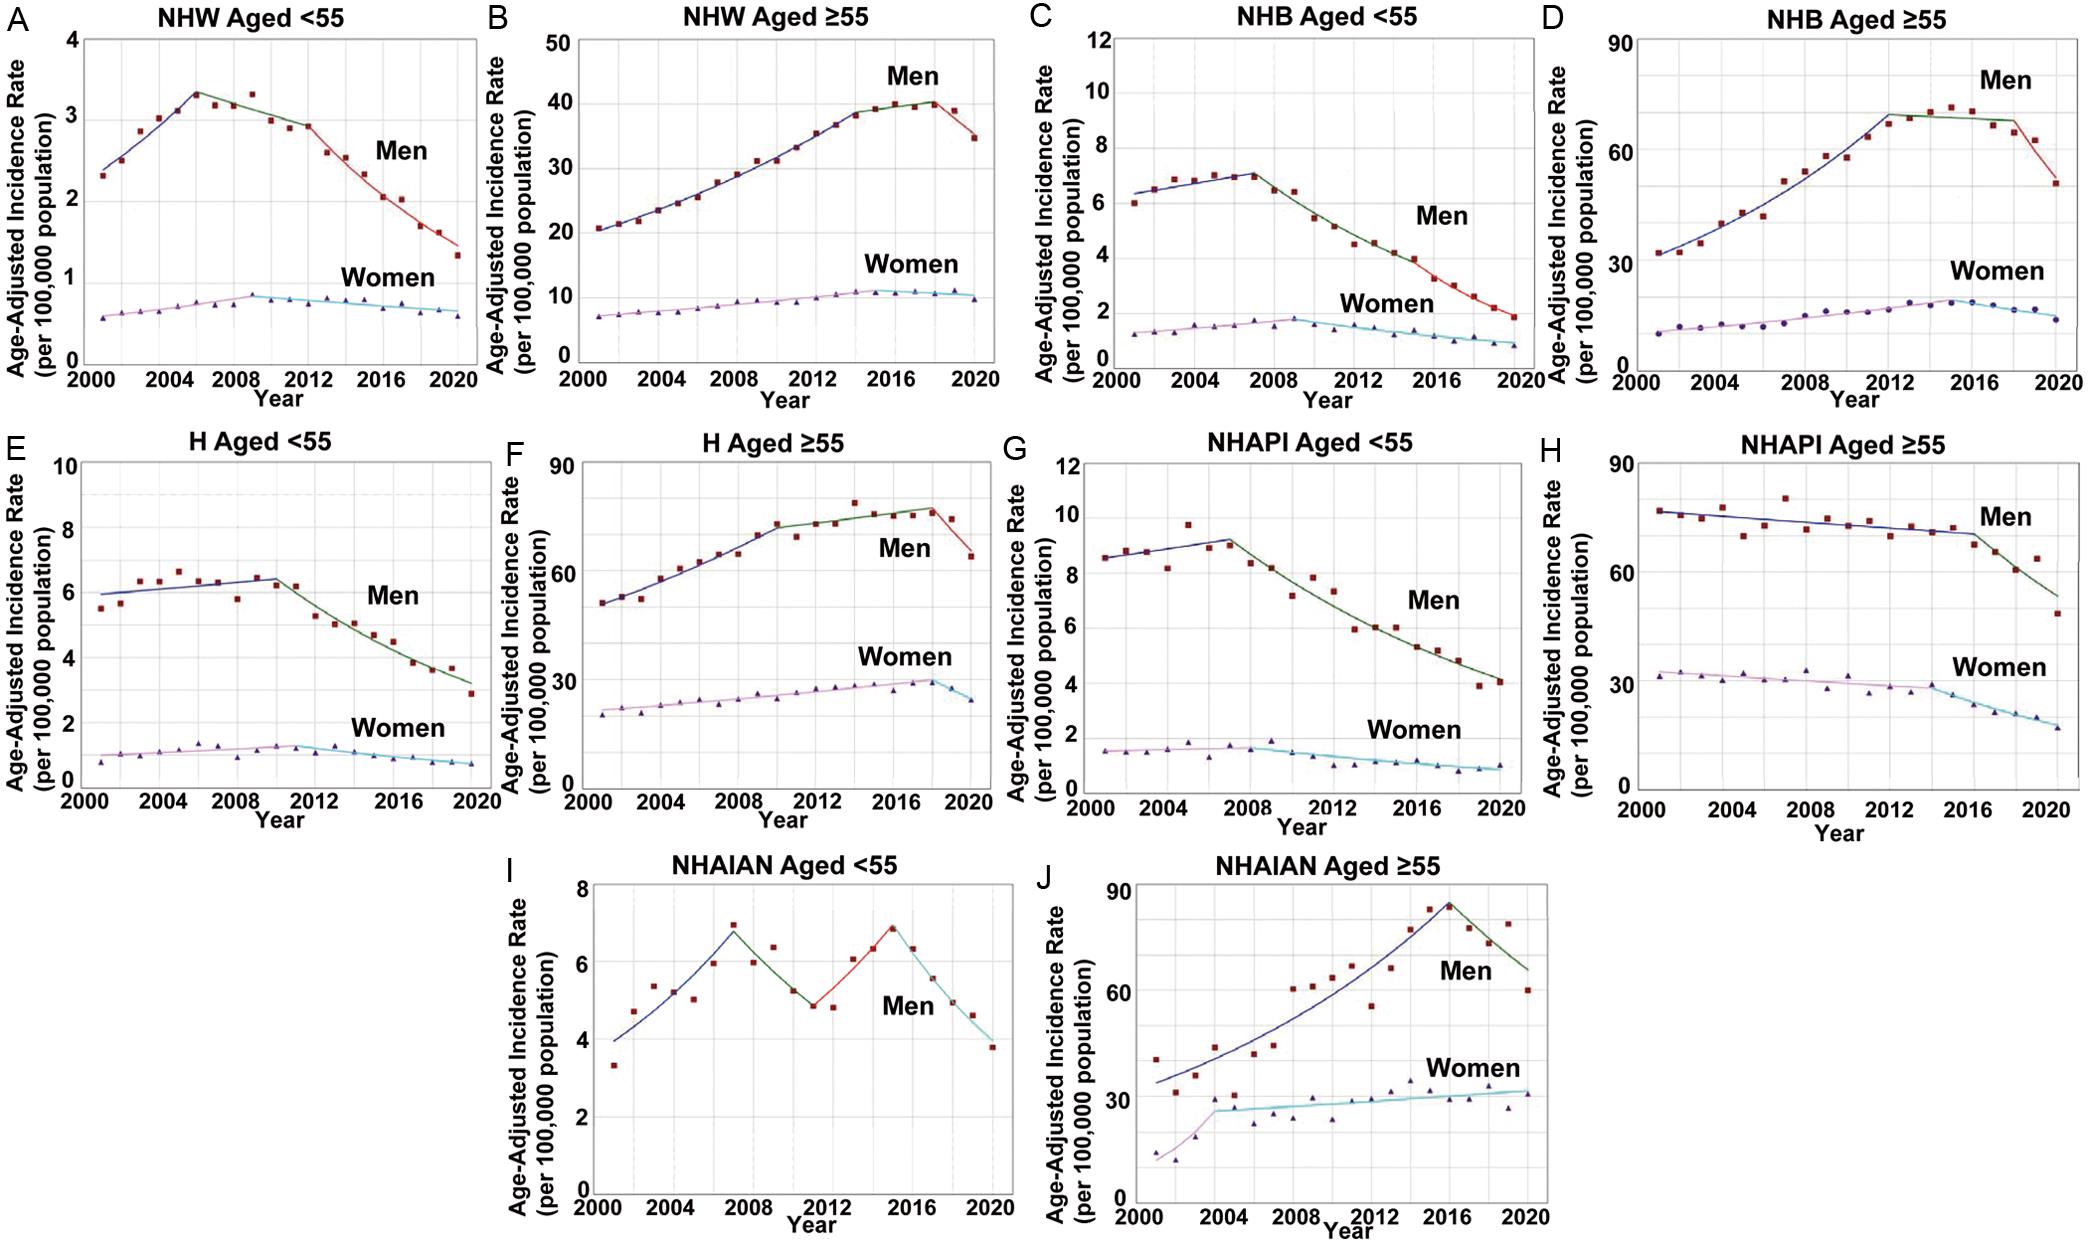 Sex-specific trends and age-adjusted incidence rates per 100,000 population for Hepatocellular Carcinoma (HCC) among different age and racial/ethnic groups.